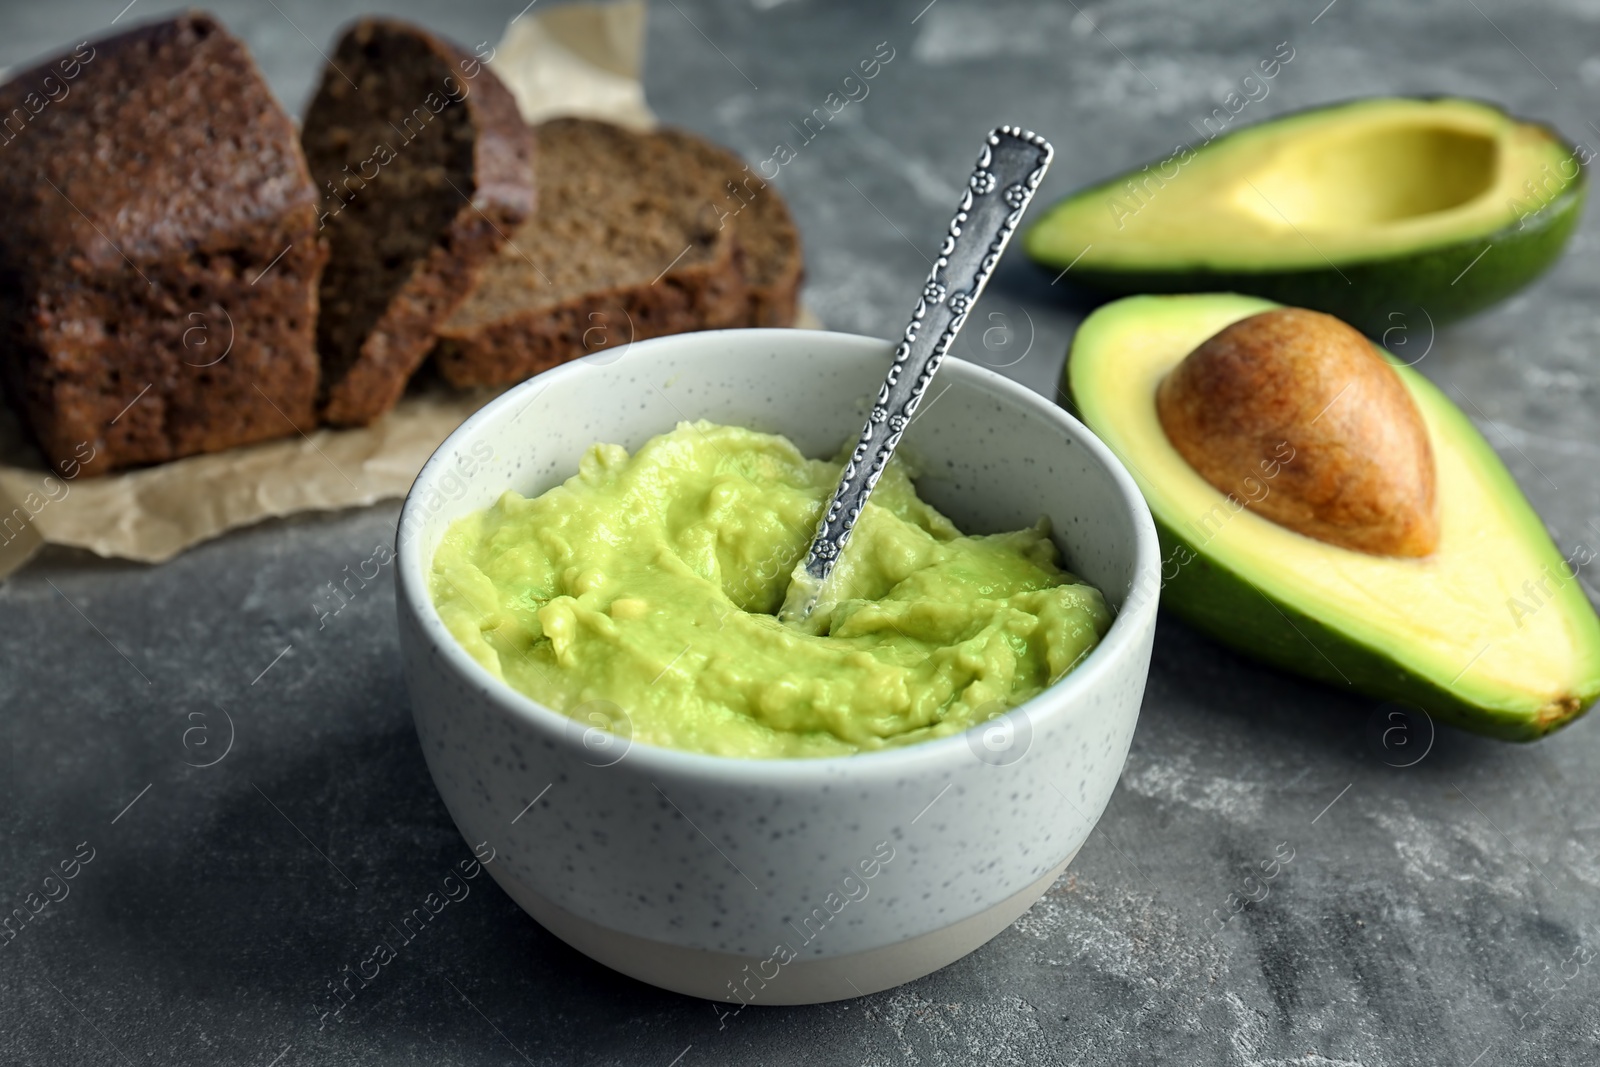 Photo of Bowl with guacamole, ripe avocado and bread on table